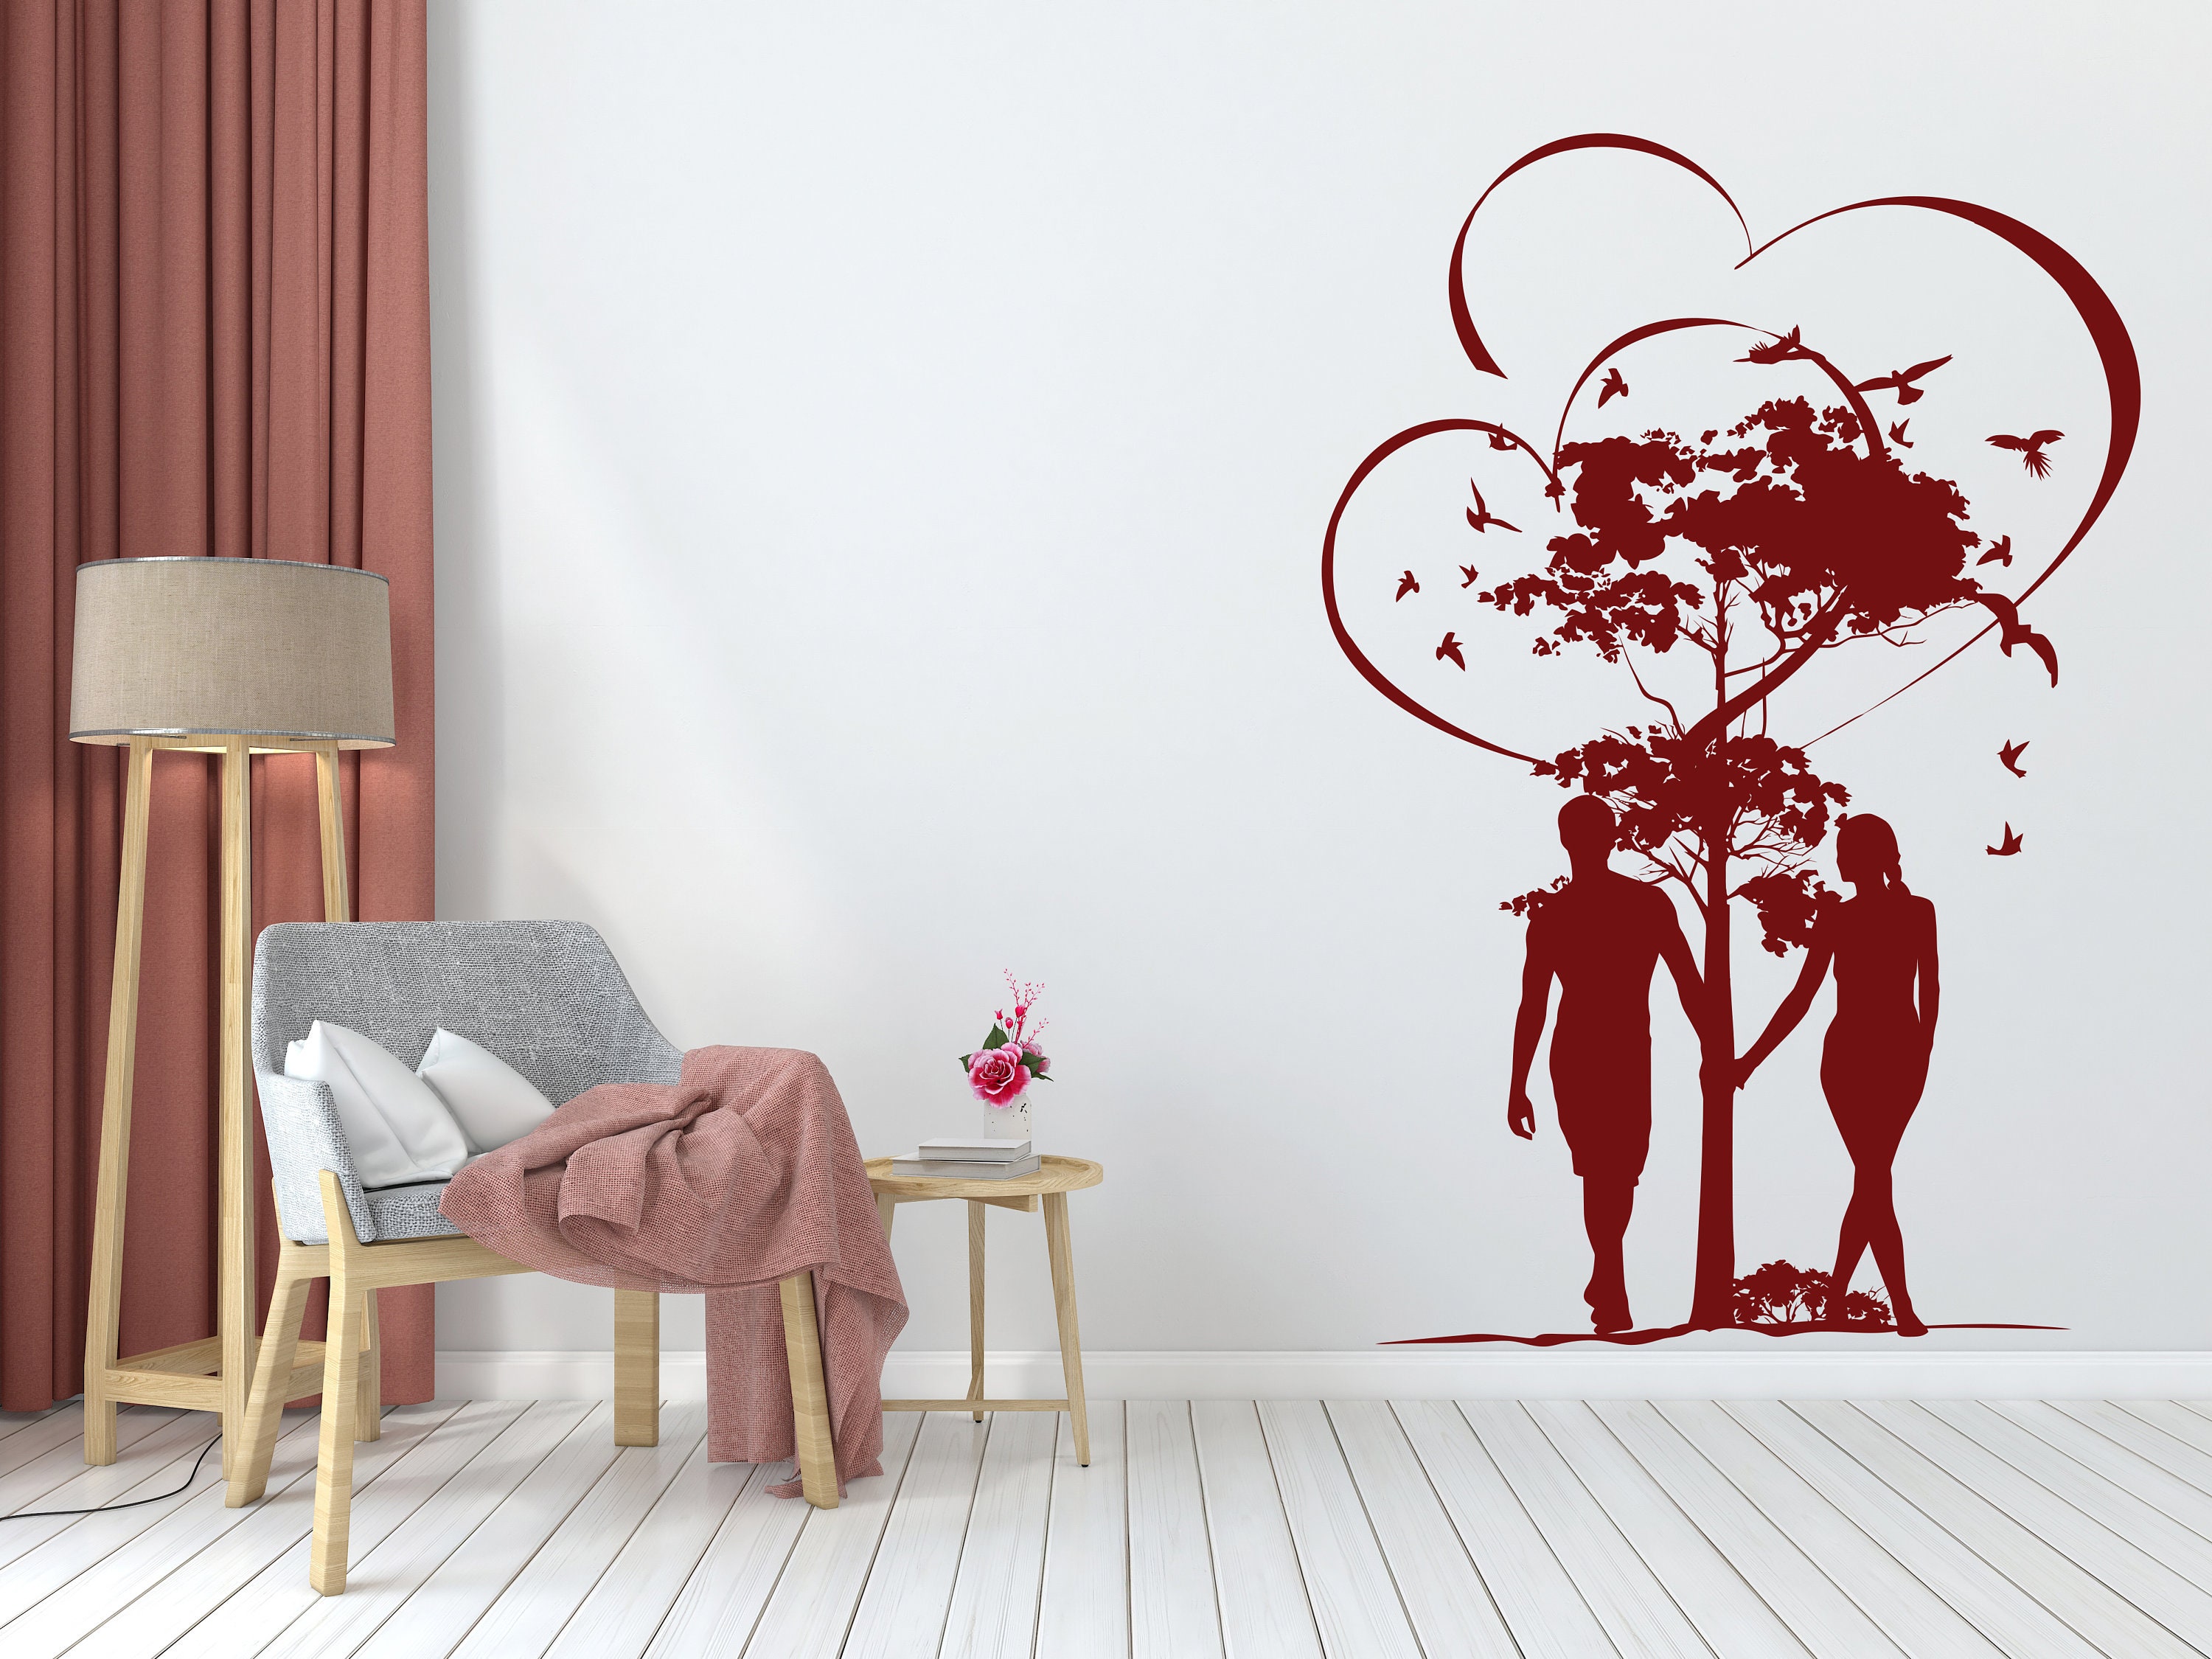 Couple Wall Decal Family Stickers Wall Art Family Decor Married Couple  Decoration Wife Lover Husband Wall Vinyl Bedroom Love Room Gift 170ES 